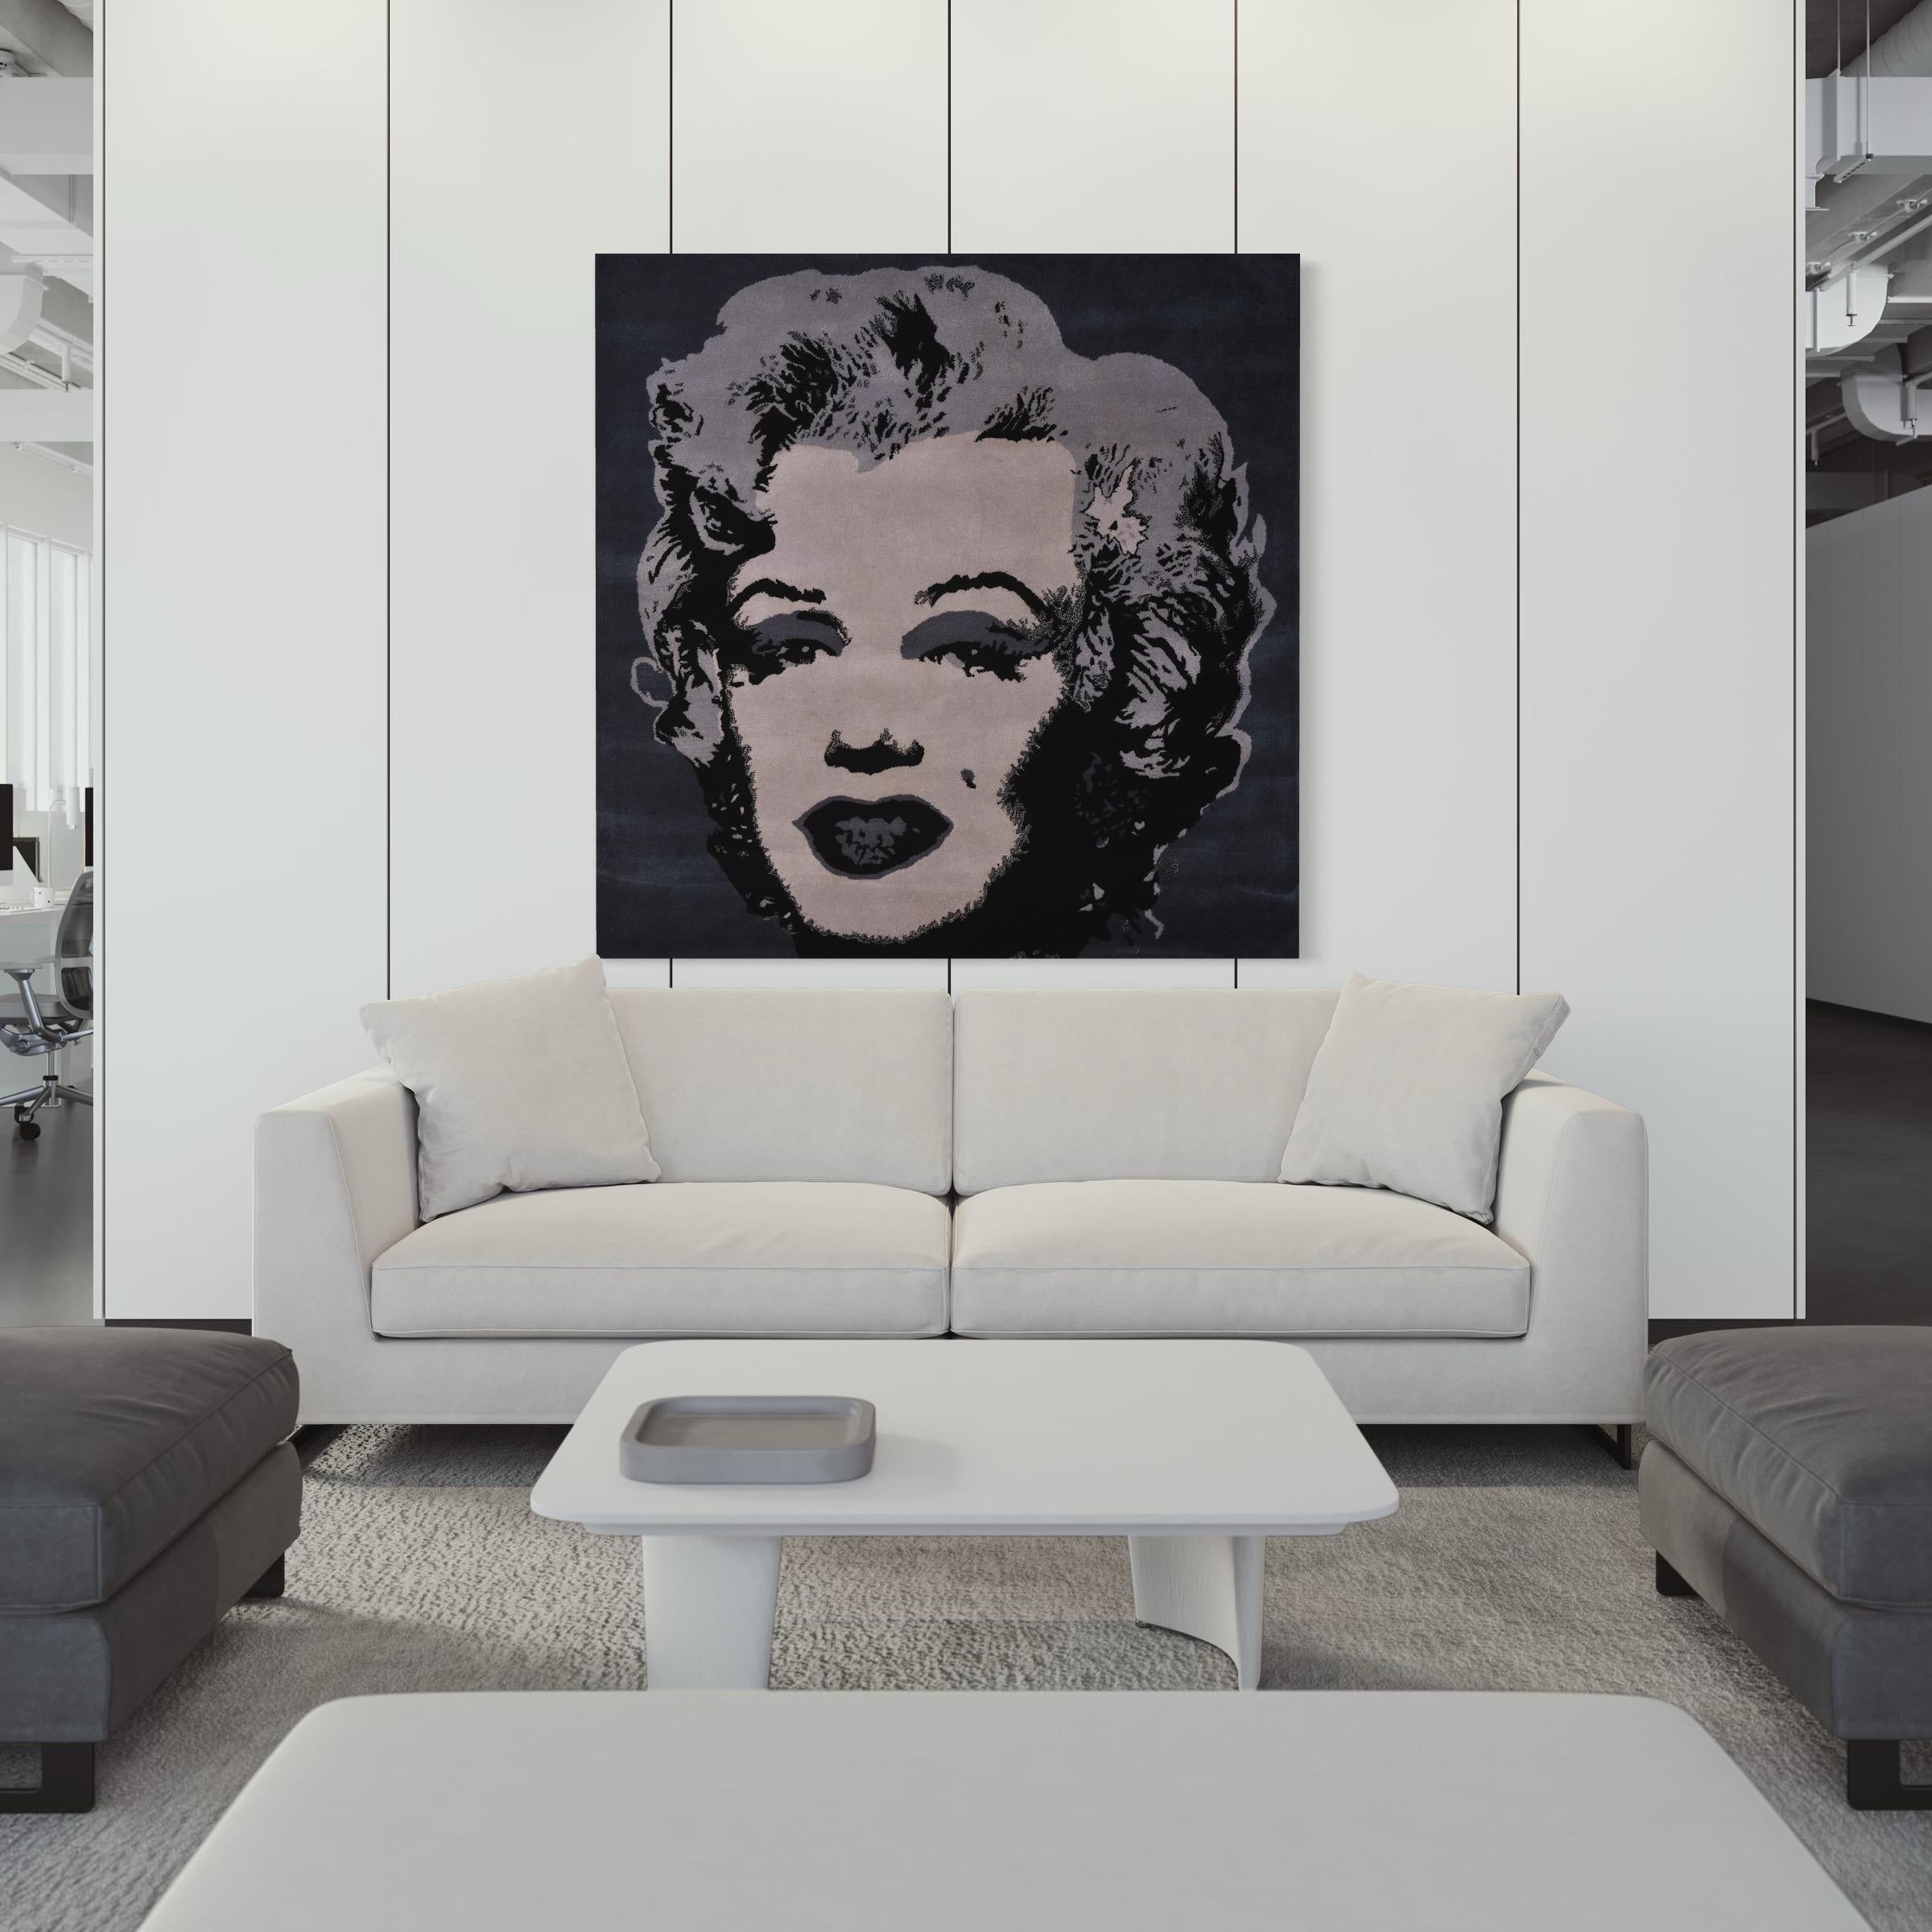 Andy Warhol (after)
Silver Marilyn, 1990s
Handmade Carpet
150 × 150 cm (59.1 × 59.1 in)
Certificate of authenticity on label
Edition of 20
In excellent condition 
Published by Modern Master Tapestries, NY
The artwork is offered unframed

As a golden